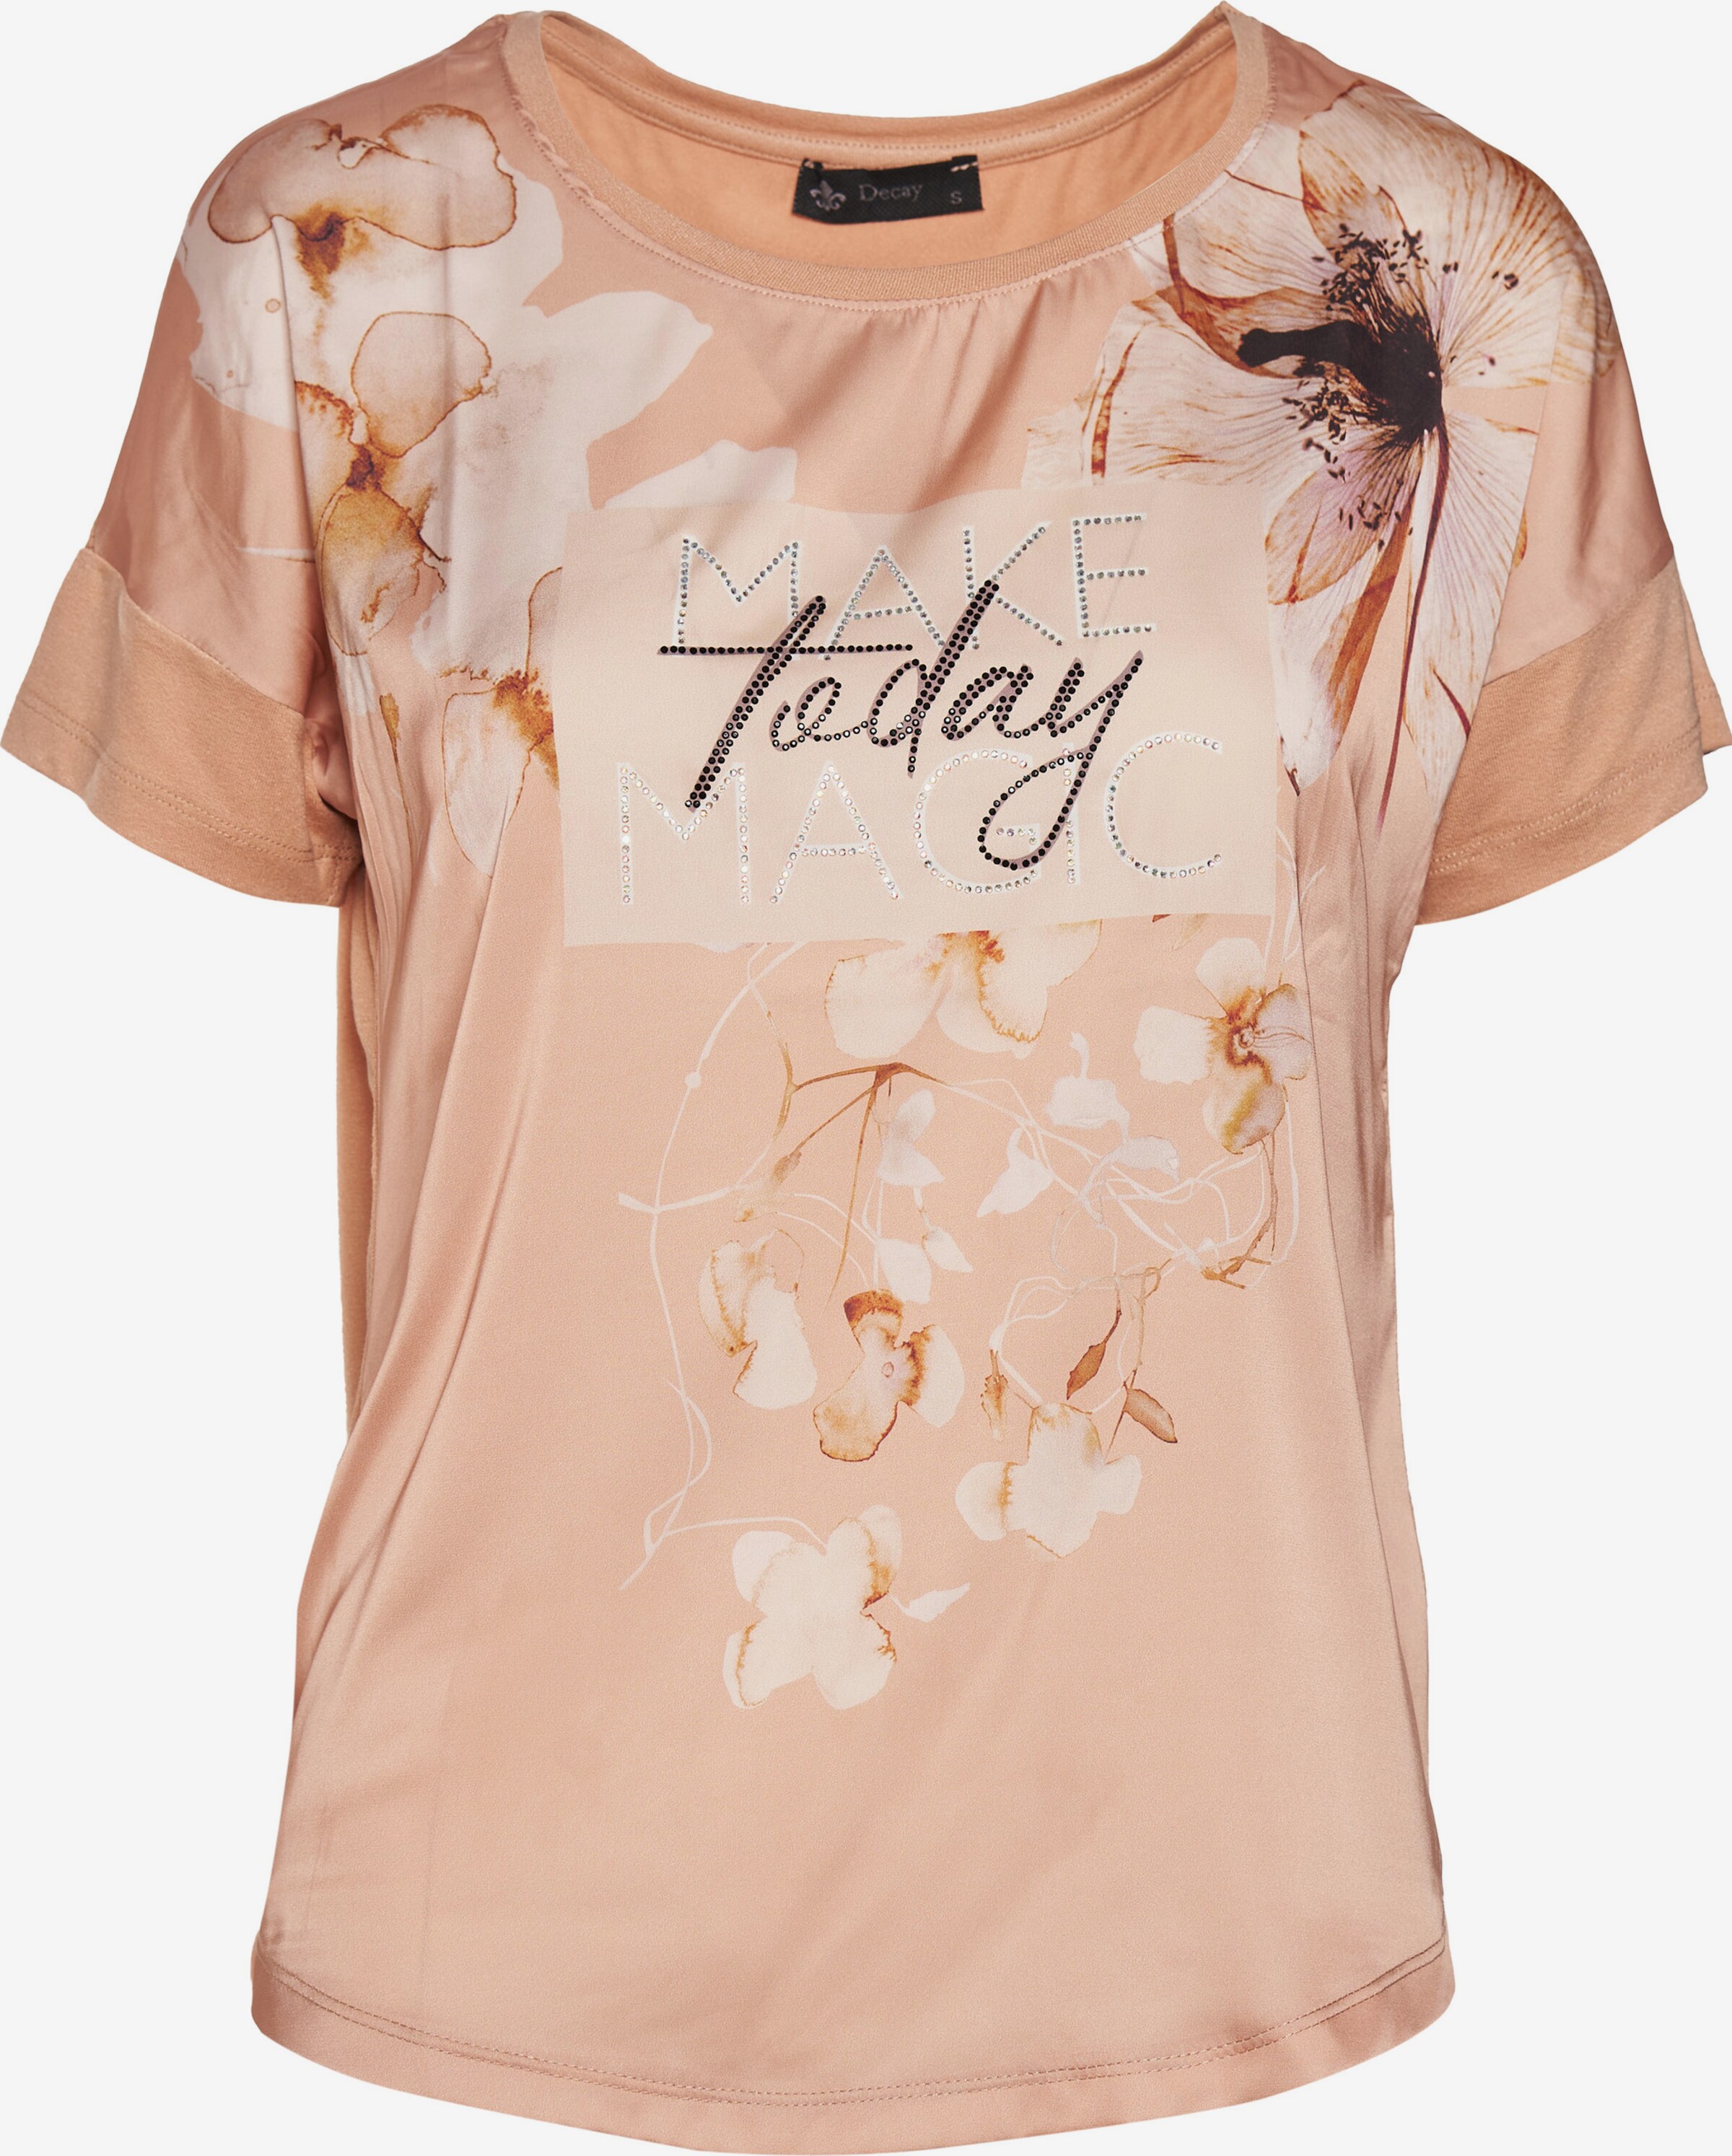 Decay in ABOUT Cognac Shirt YOU |